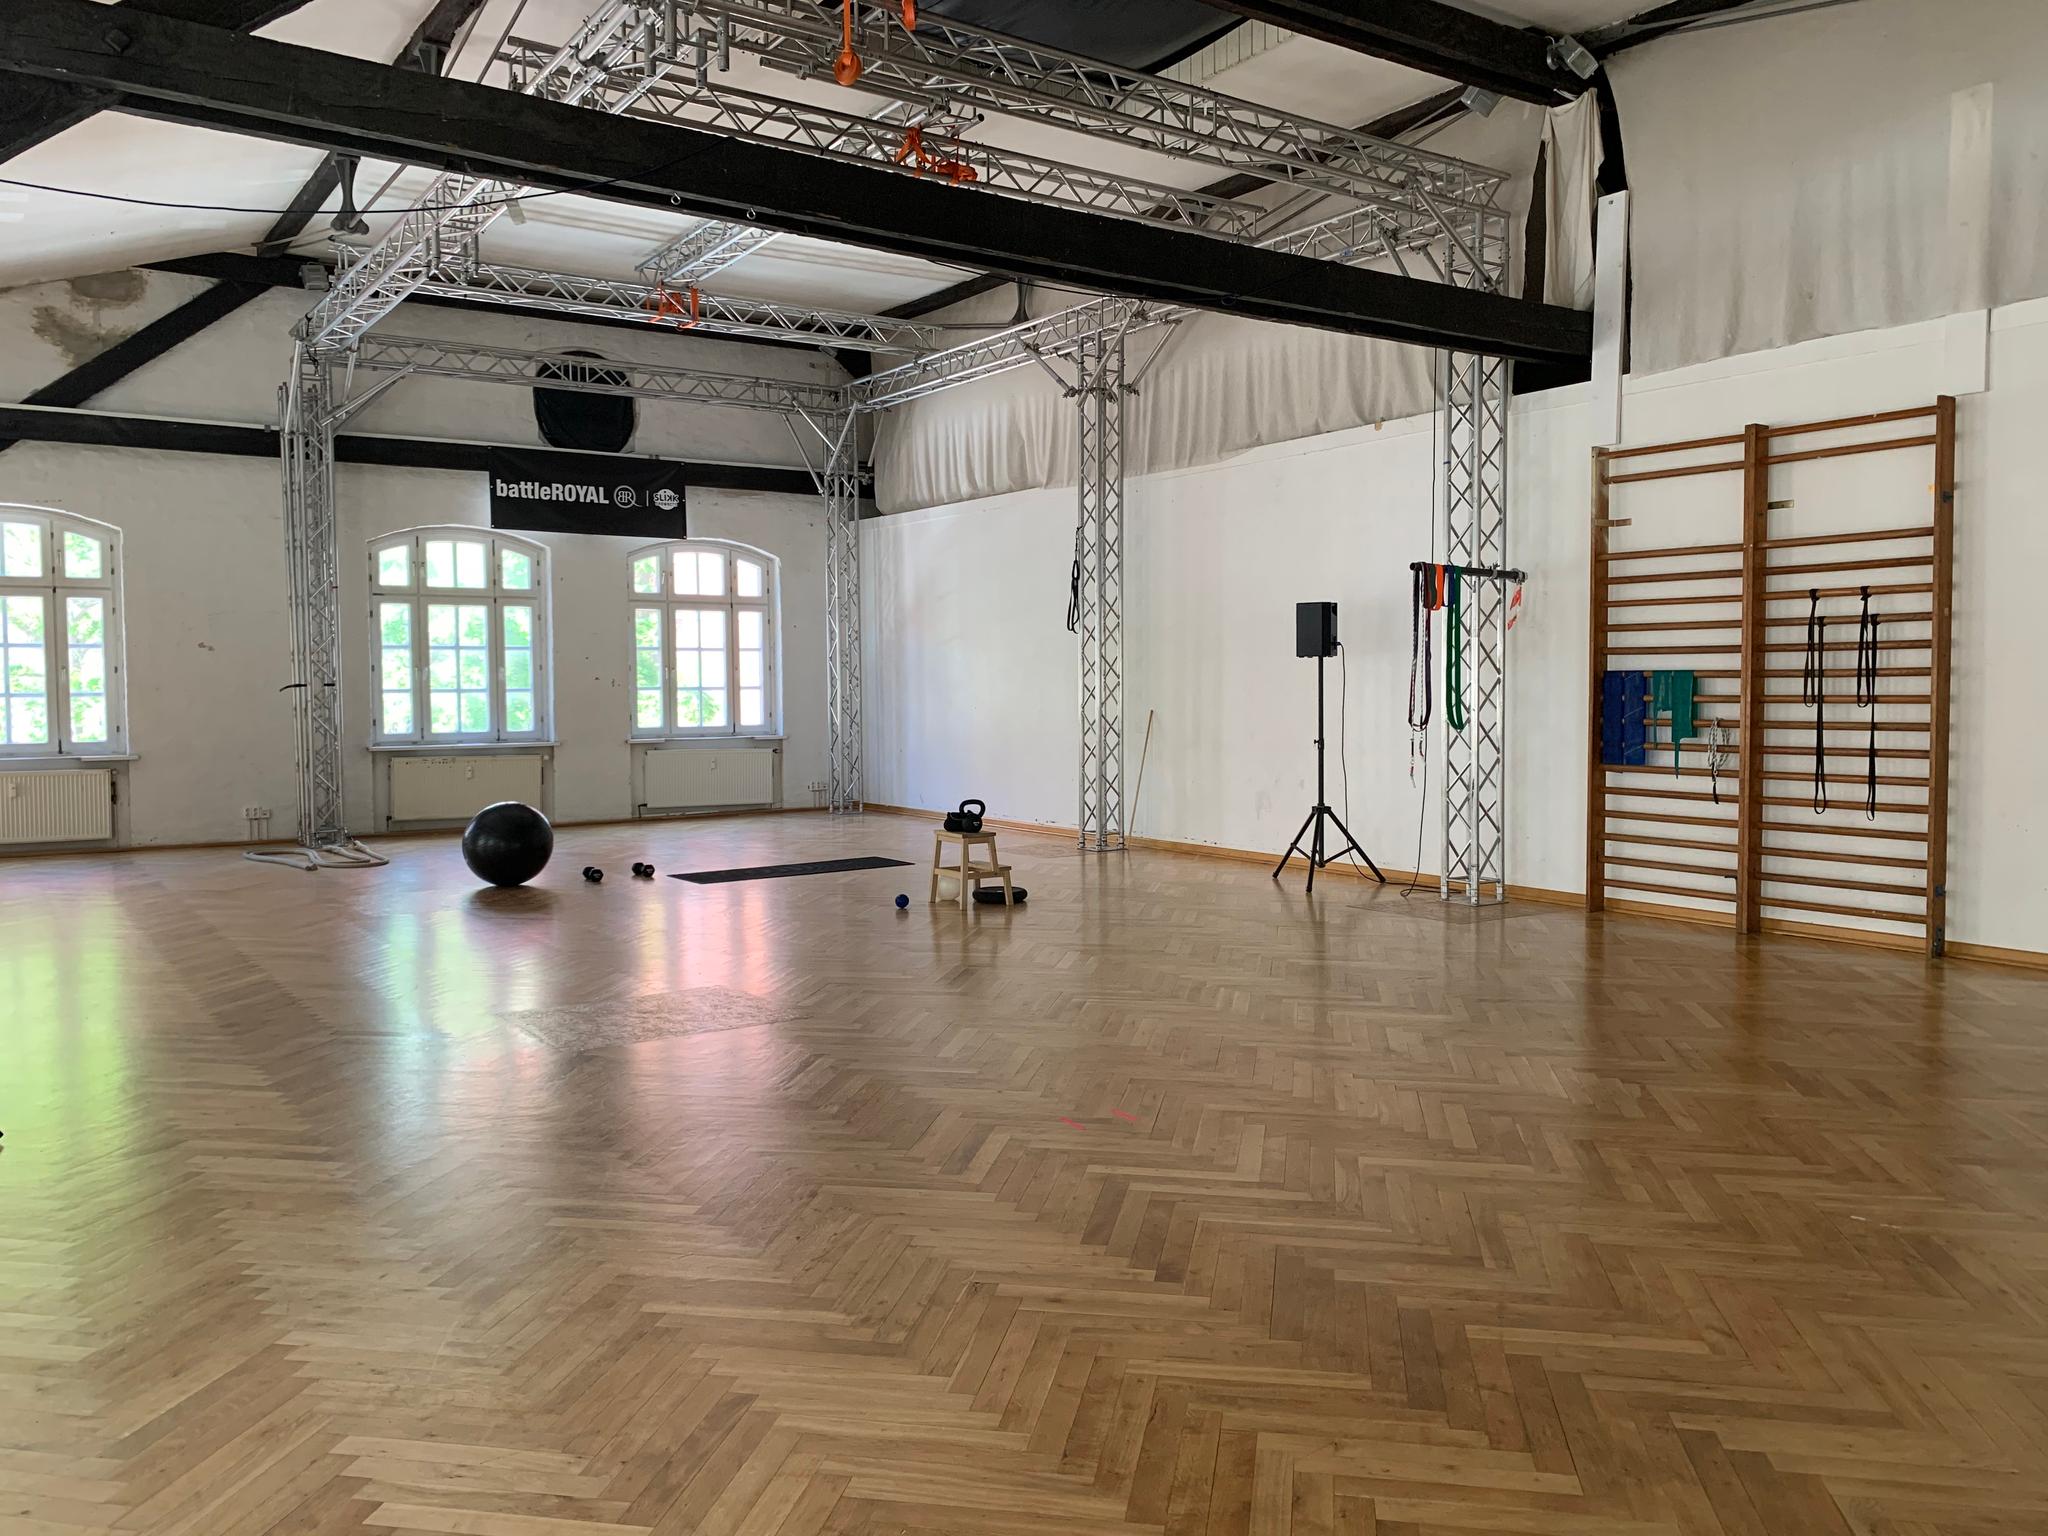 Wide shot of the studio space with yoga equipment on the floor from Battle Royal Studios